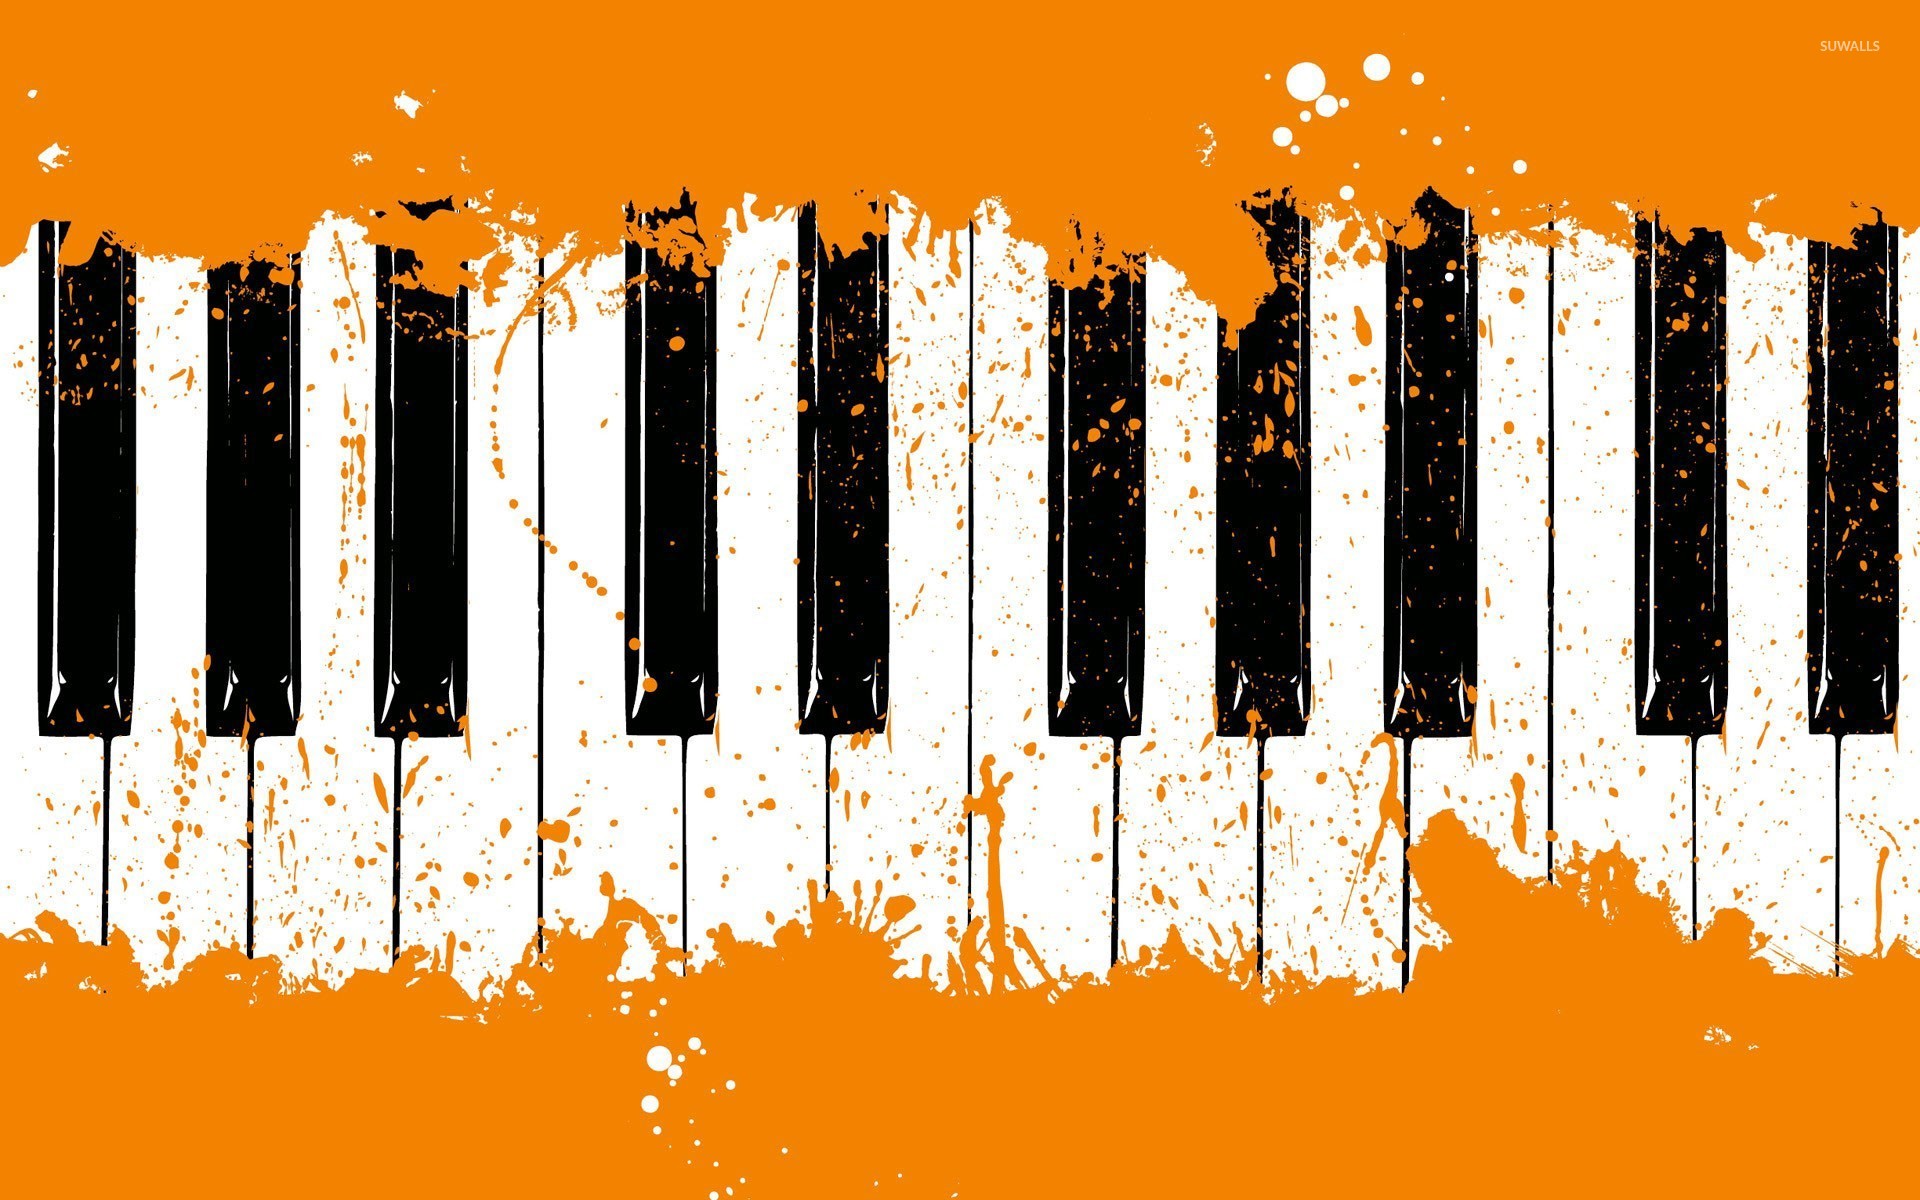 Piano Keyboard Wallpaper - Musical And Artistic , HD Wallpaper & Backgrounds